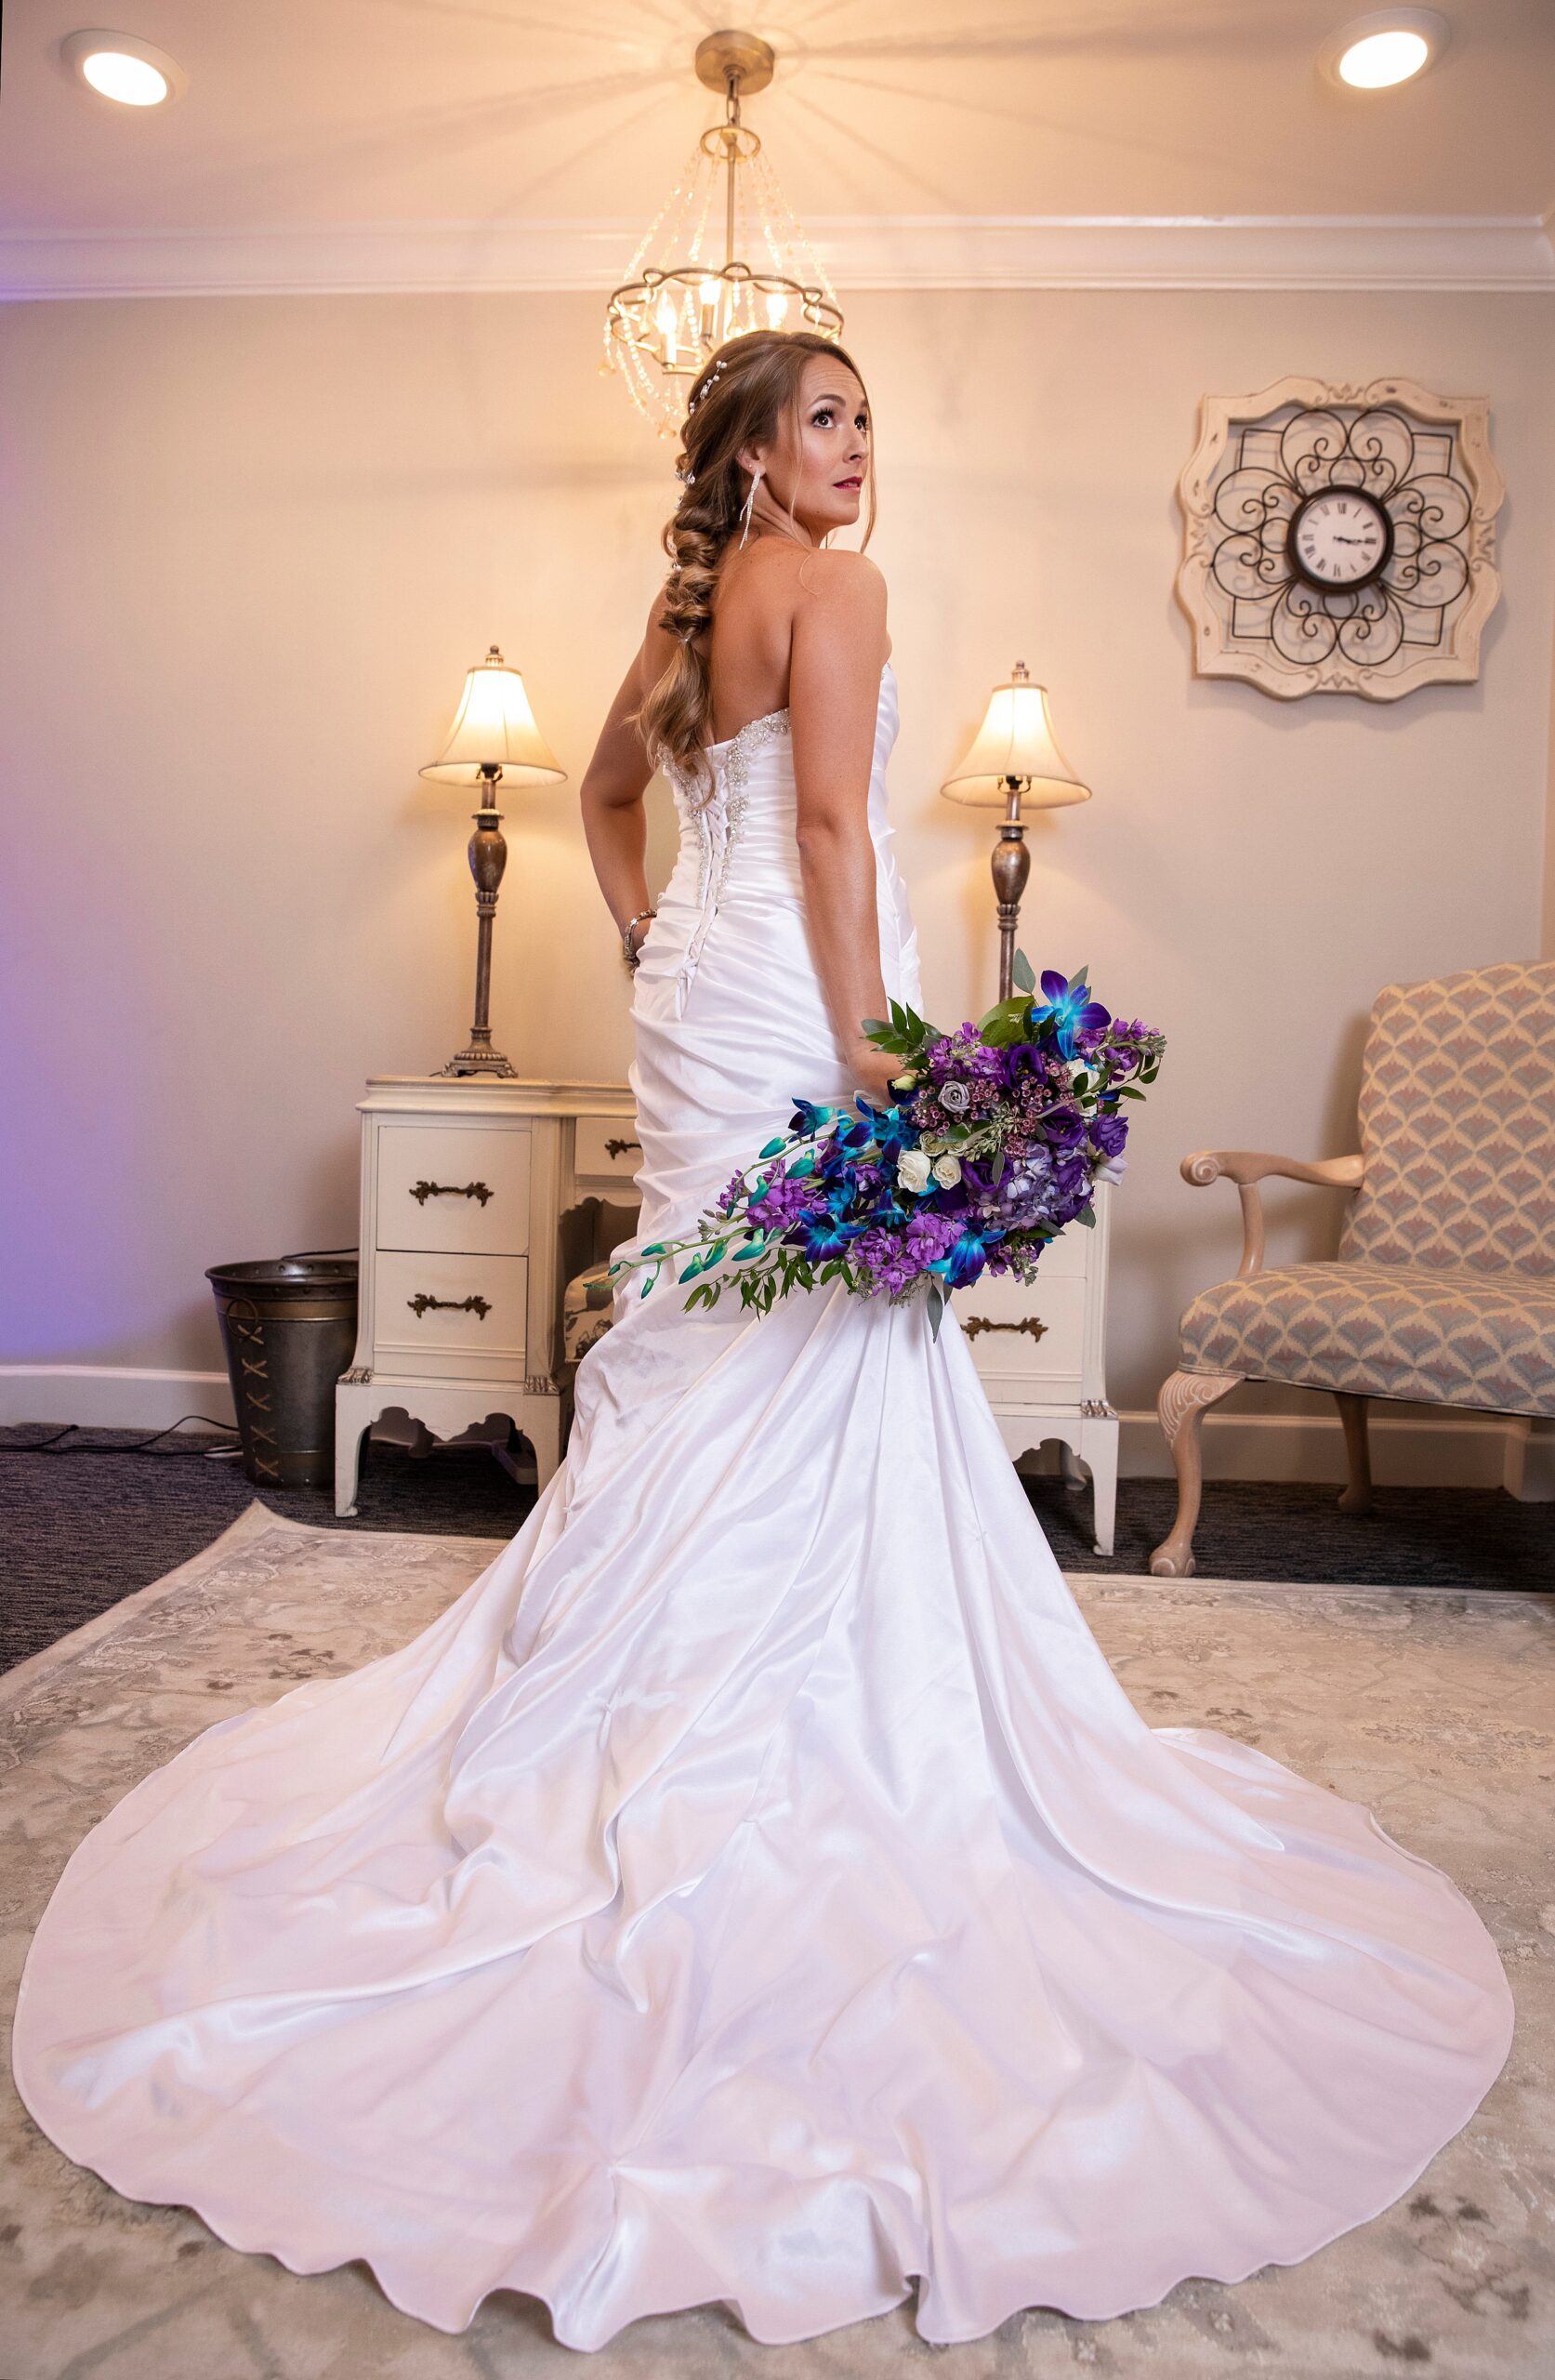 A bride looks over her shoulder while standing in the getting ready room with her train fully spread